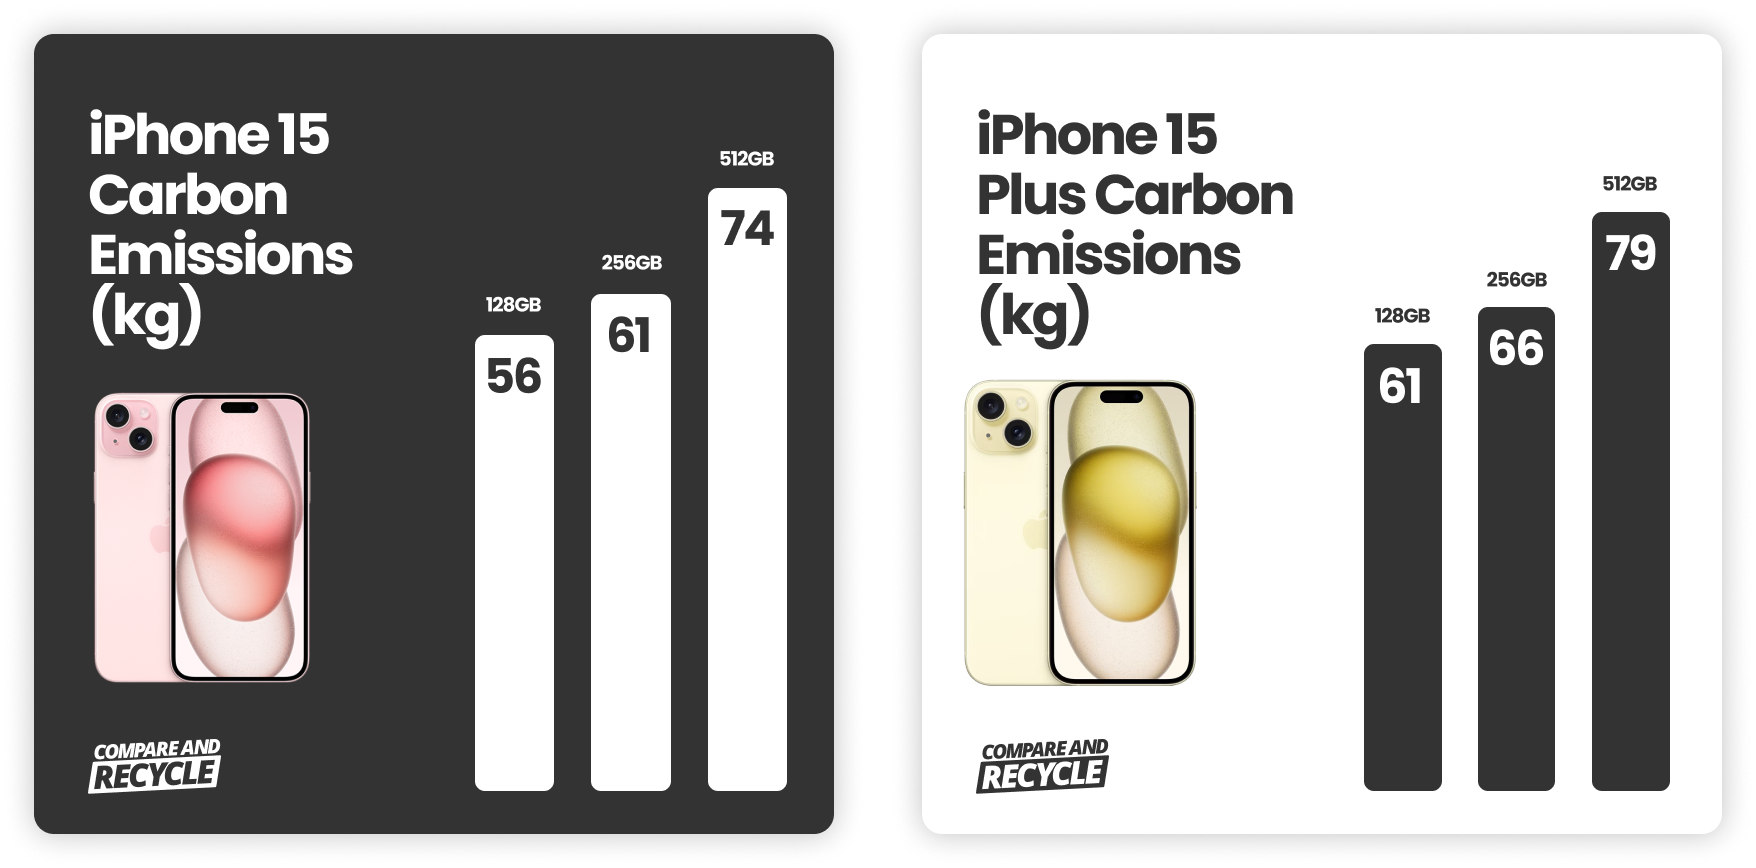 bar chart illustrating total lifetime carbon emissions of iPhone 15 and iPhone 15 Plus